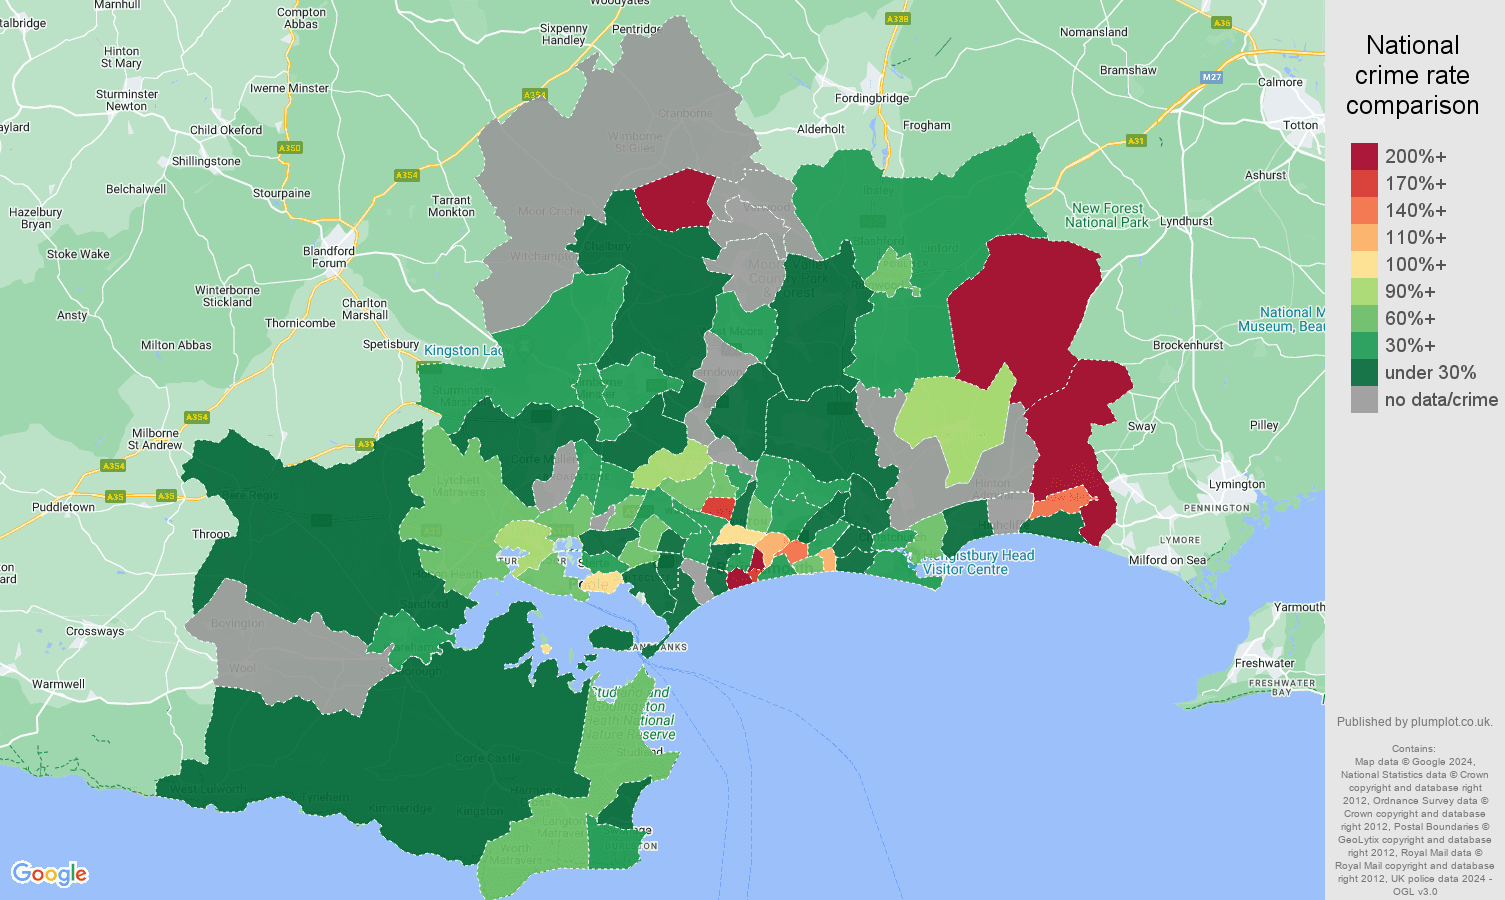 Bournemouth possession of weapons crime rate comparison map